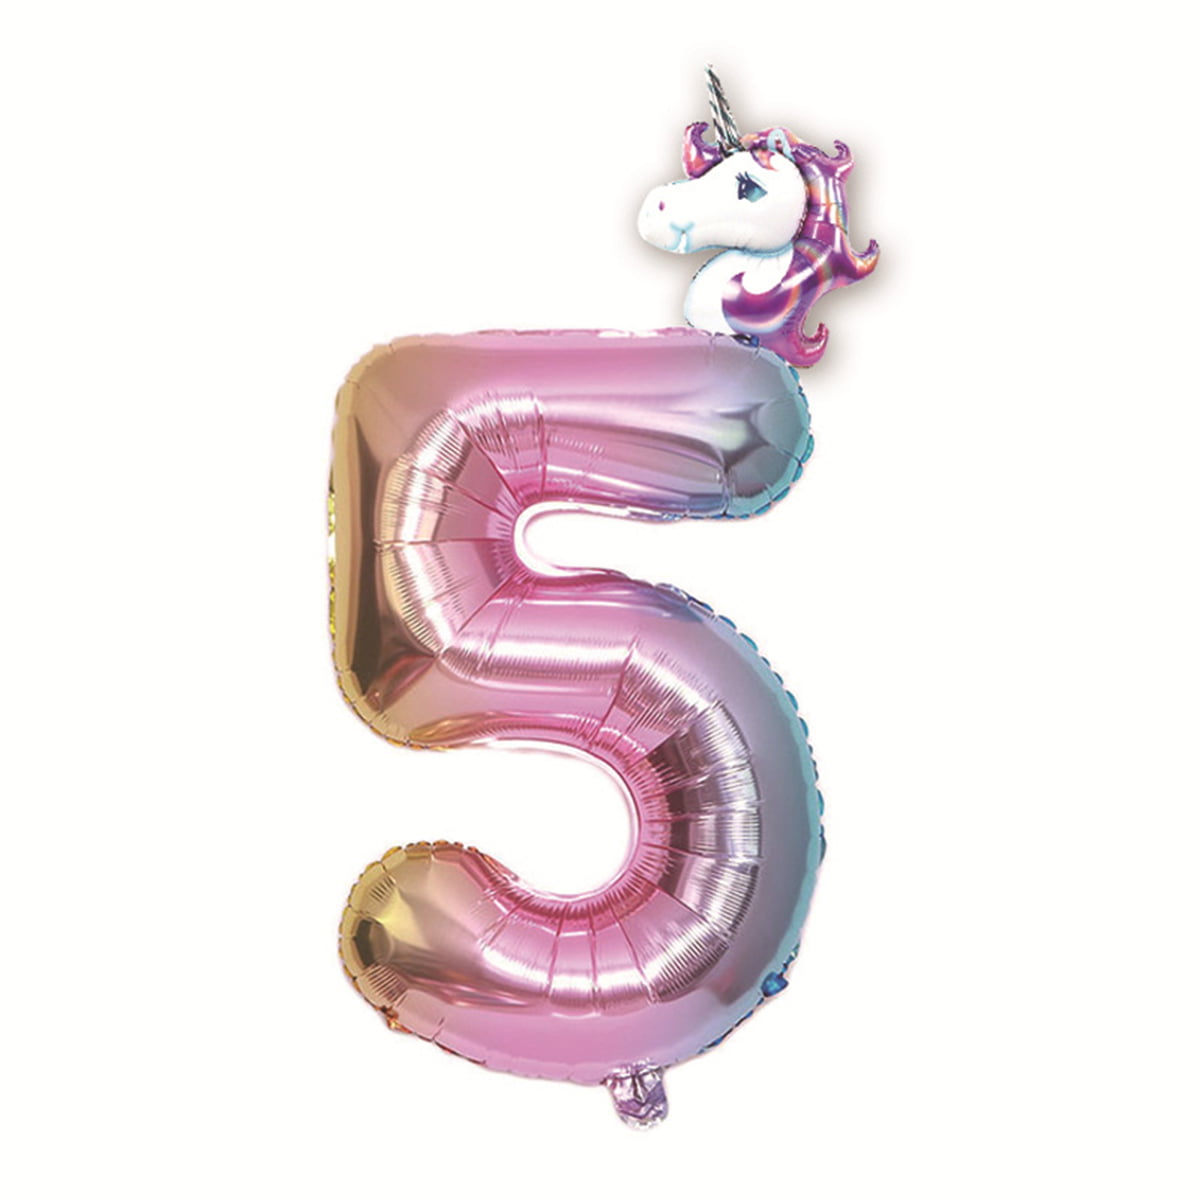 FREE SHIPPING Lots of Colors Details about   UNICORN Birthday Cake Topper 9 Piece Set